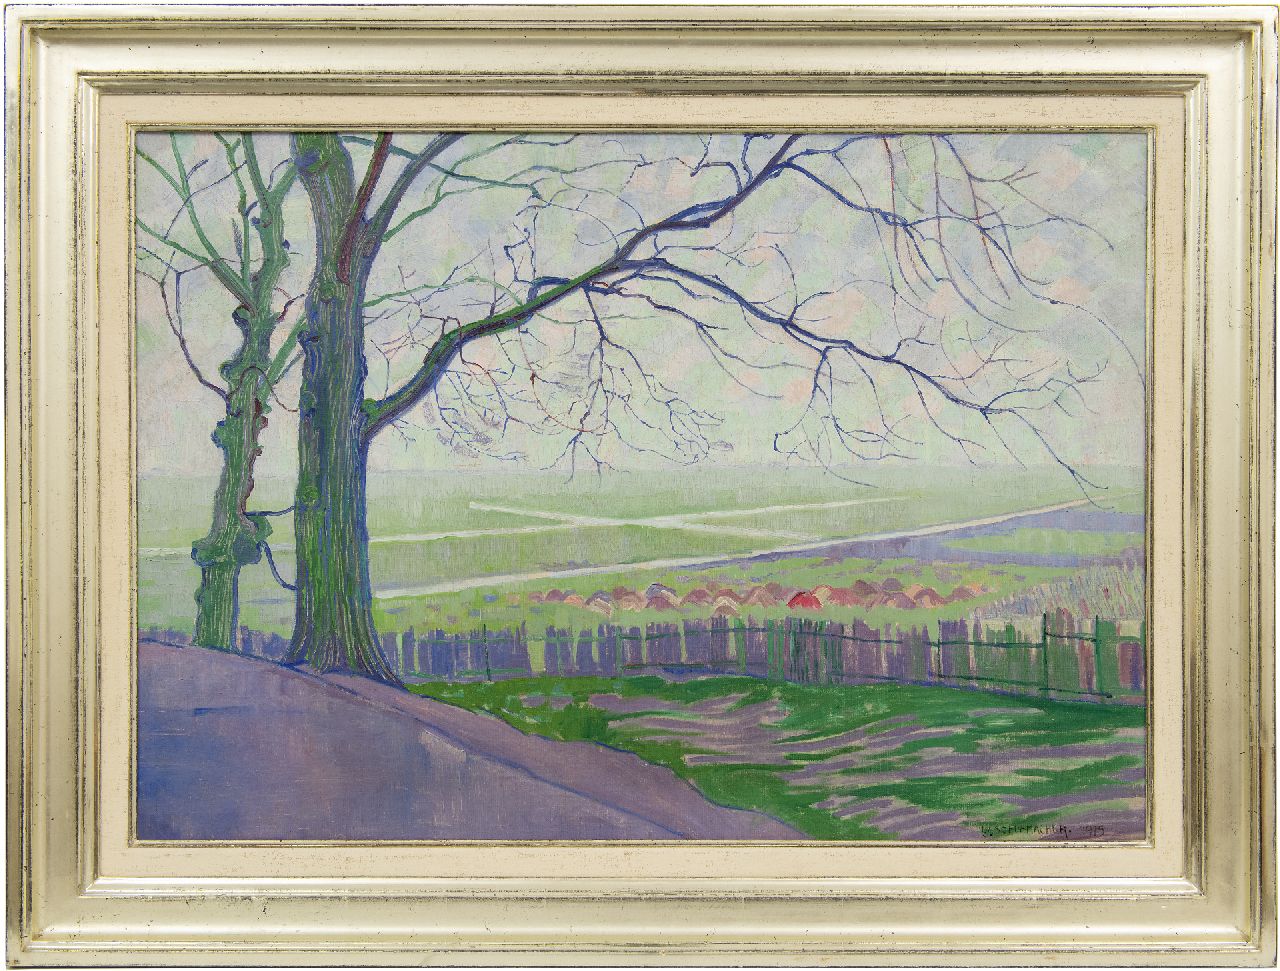 Schuhmacher W.G.C.  | Wijtze Gerrit Carel 'Wim' Schuhmacher | Paintings offered for sale | Landscape near Hillegersberg with trees in the foreground, oil on canvas 56.5 x 80.7 cm, signed l.r. and dated 1915